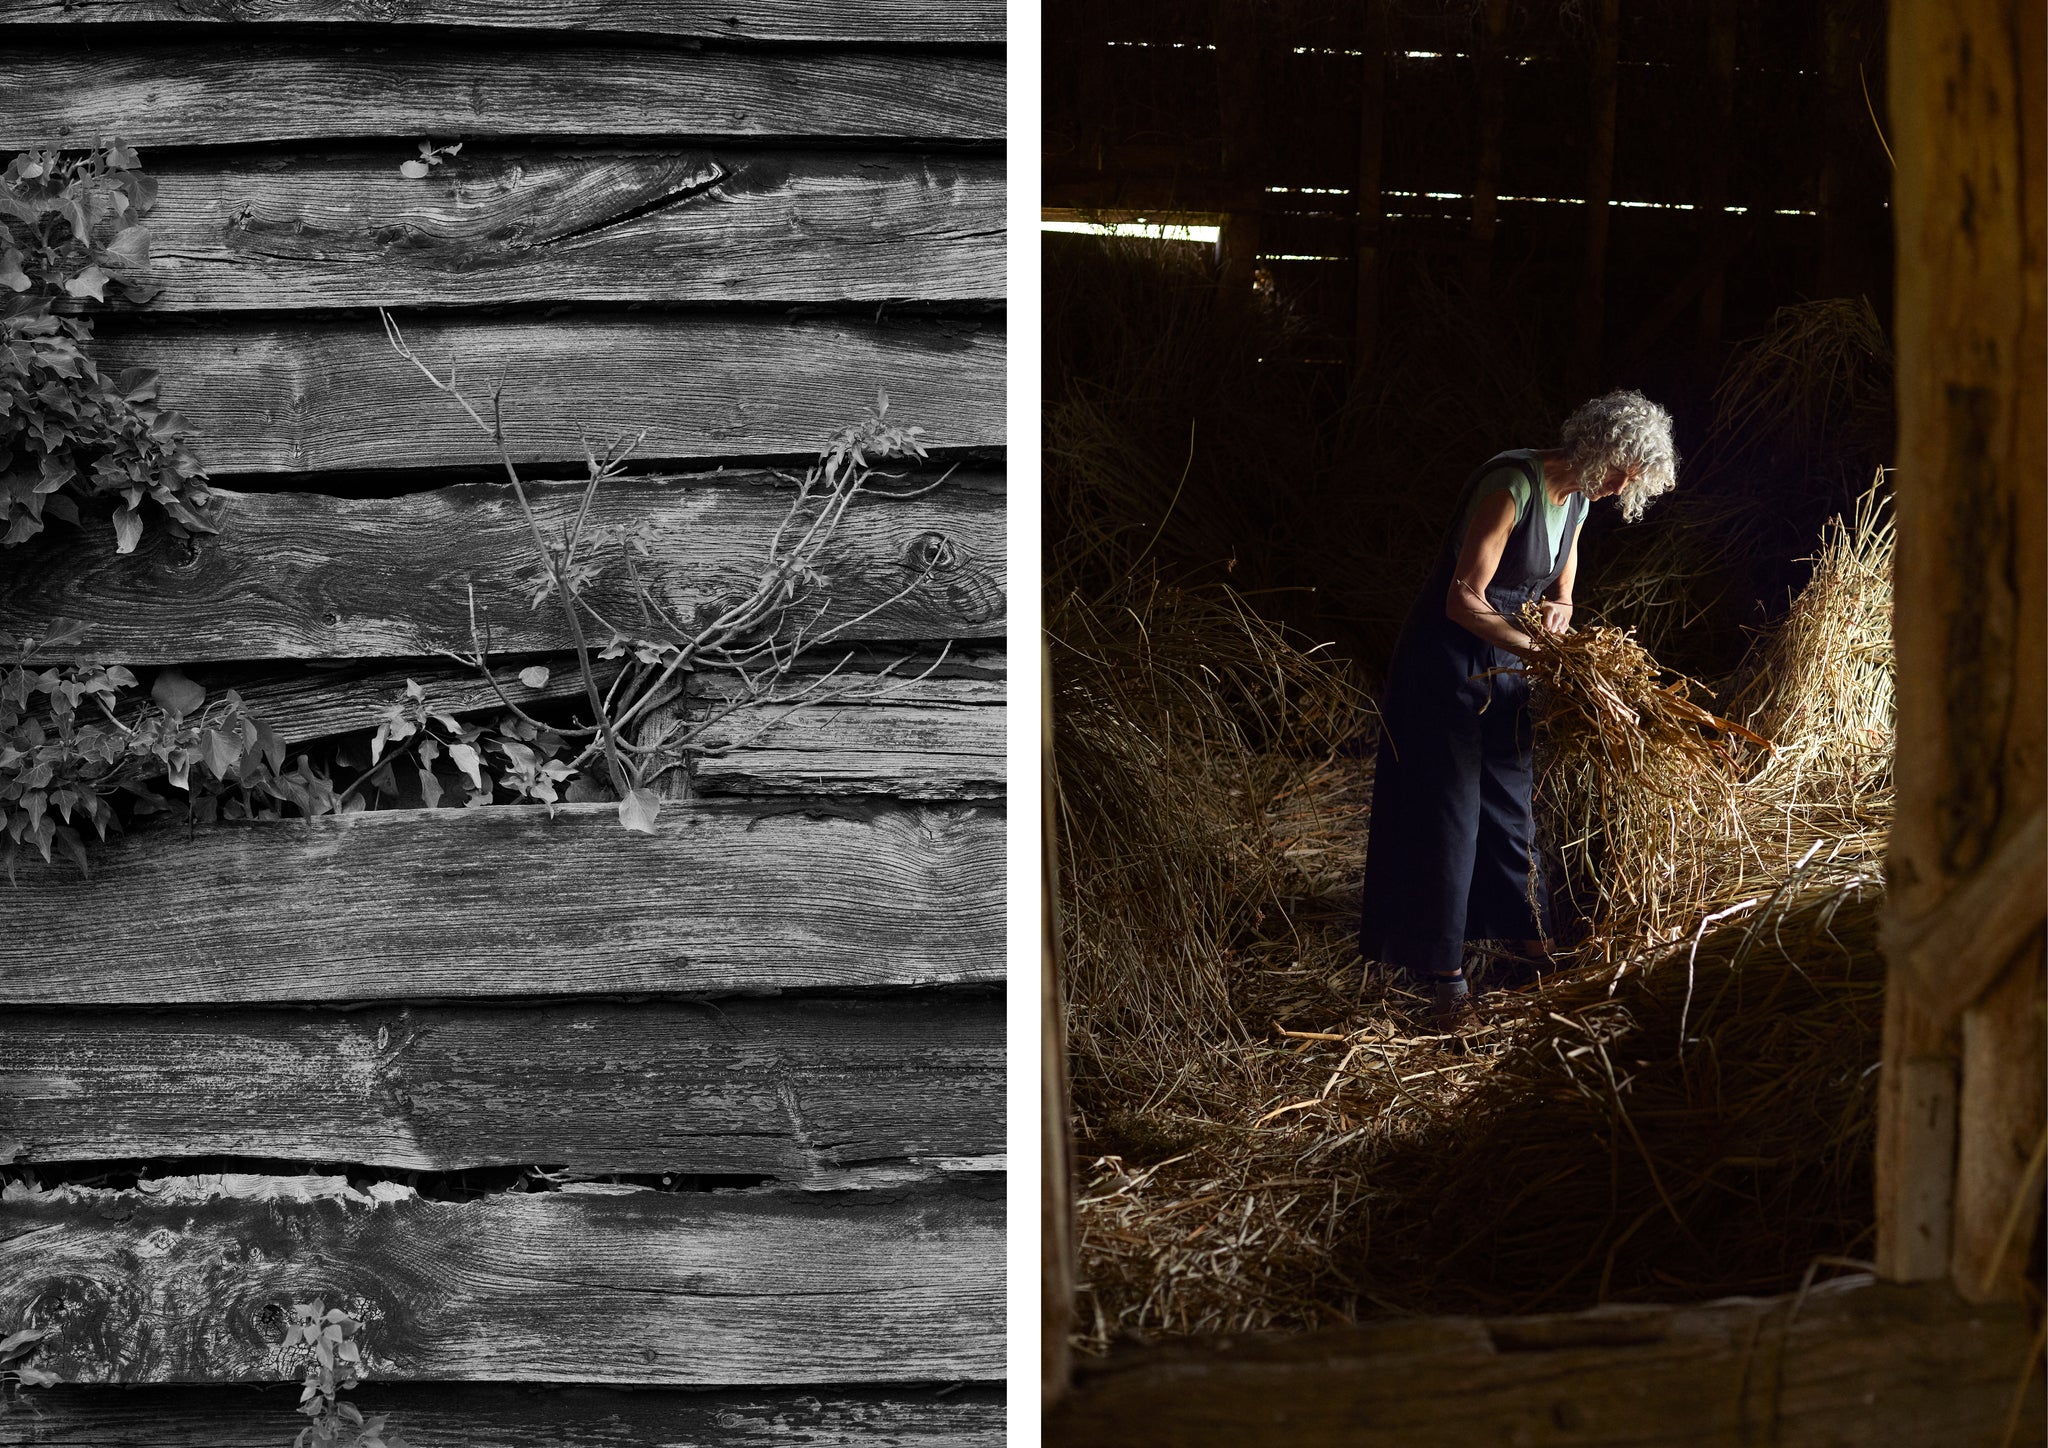 Barn and woman in barn with rush